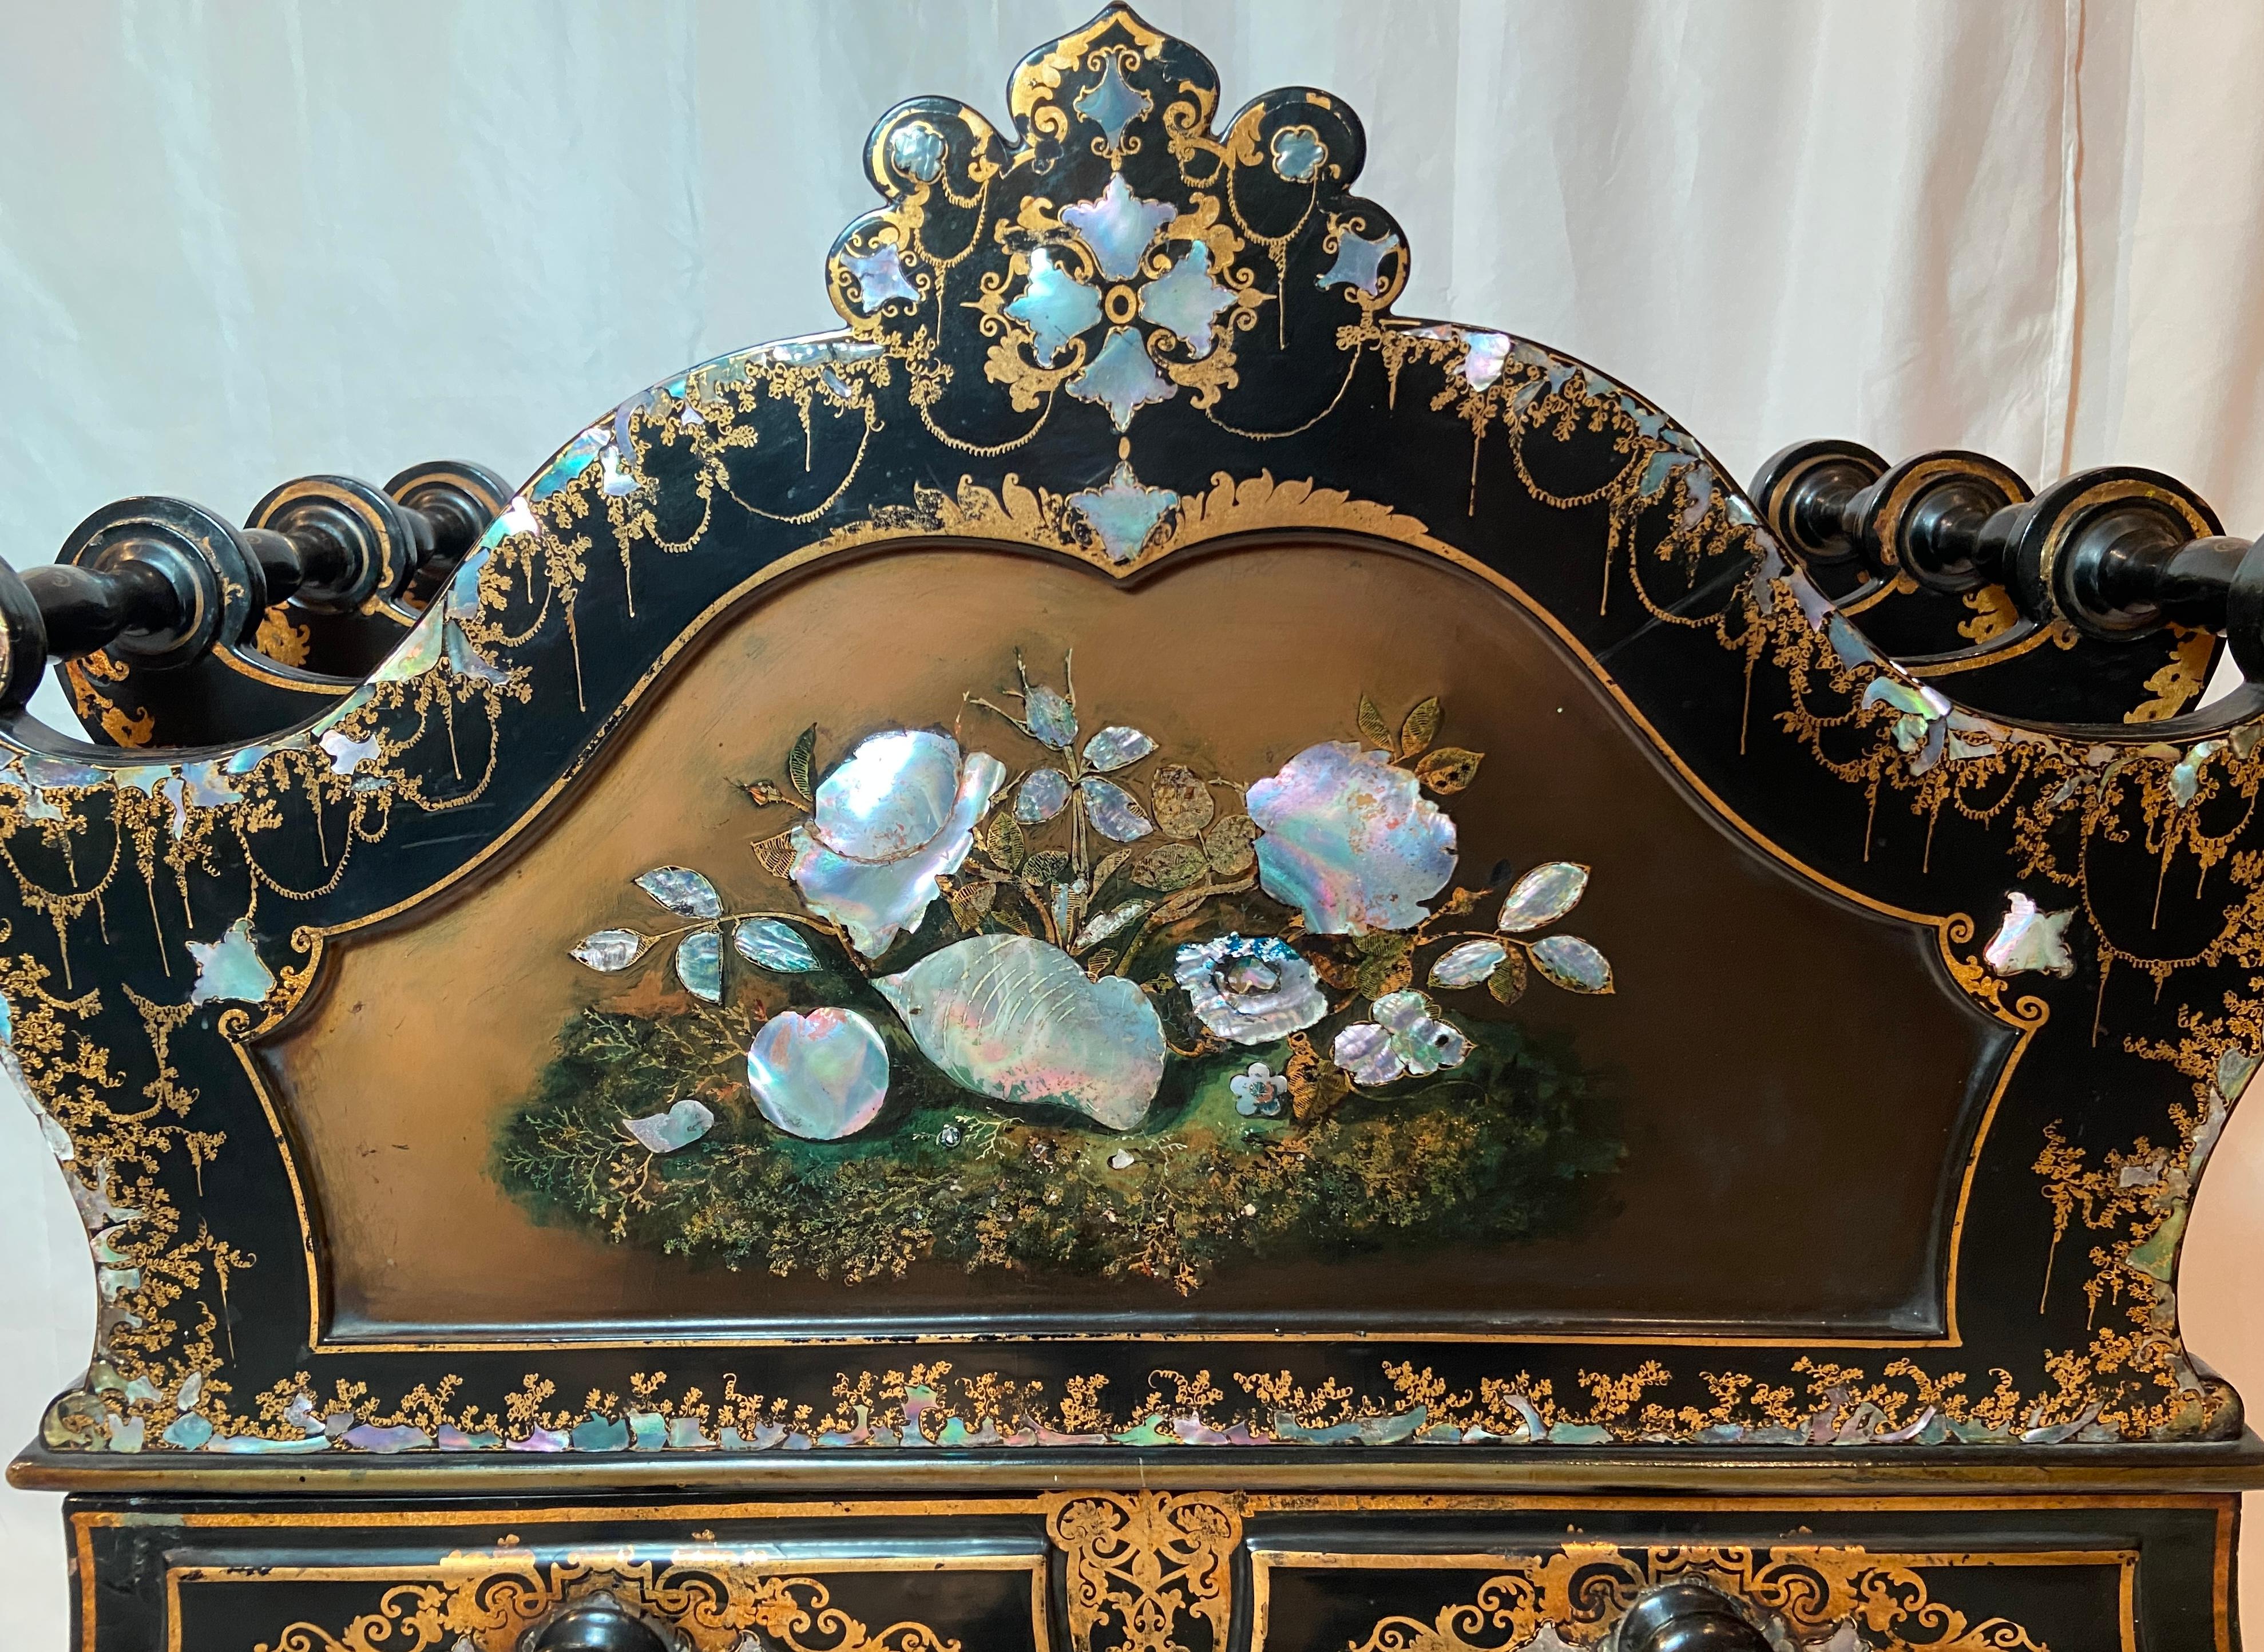 Rare Antique English Victorian Black Lacquer Canterbury with Gold and Mother of Pearl Inlay, Circa 1860.